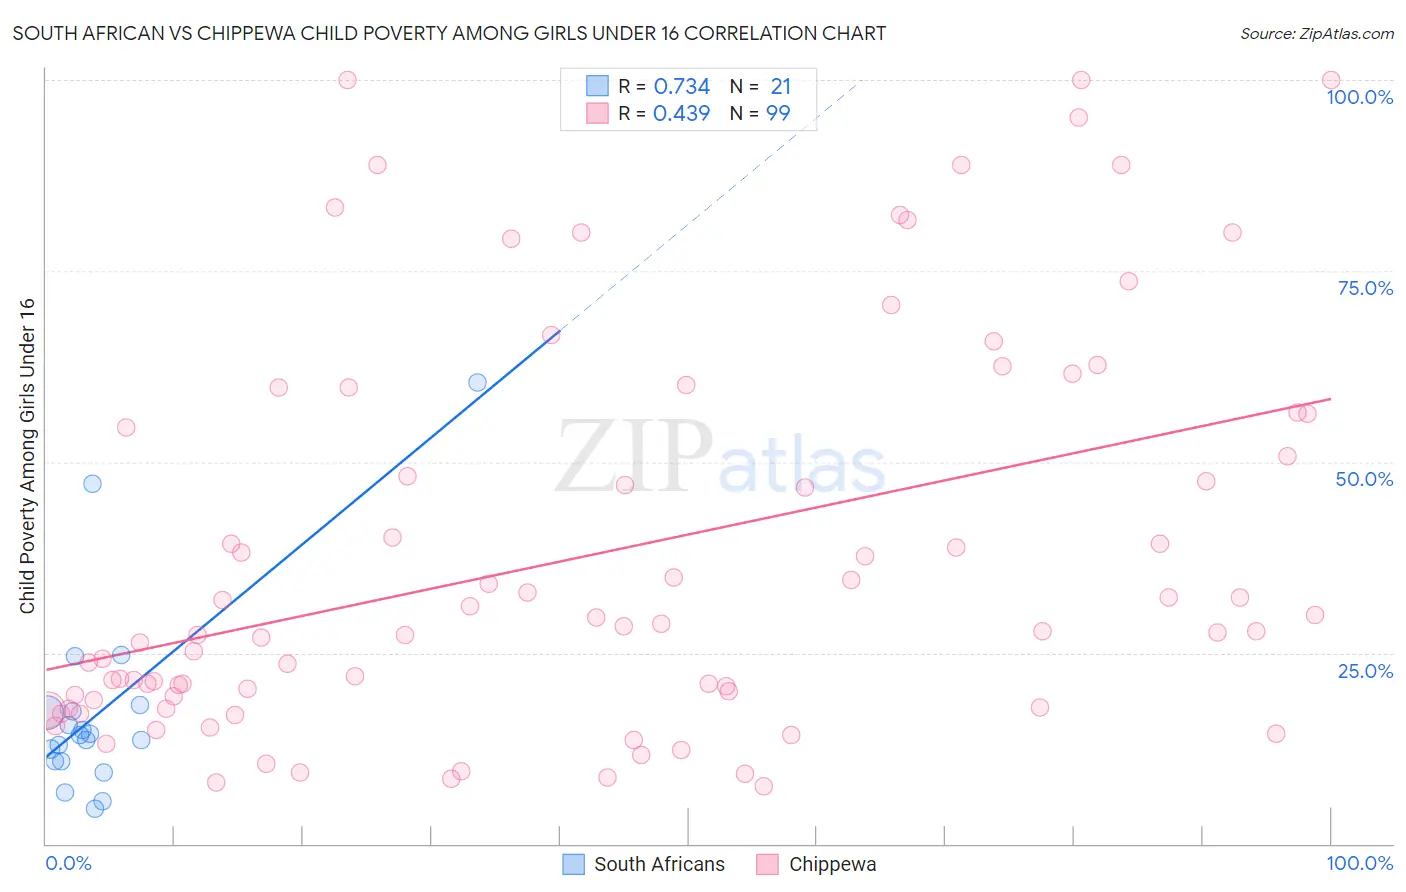 South African vs Chippewa Child Poverty Among Girls Under 16